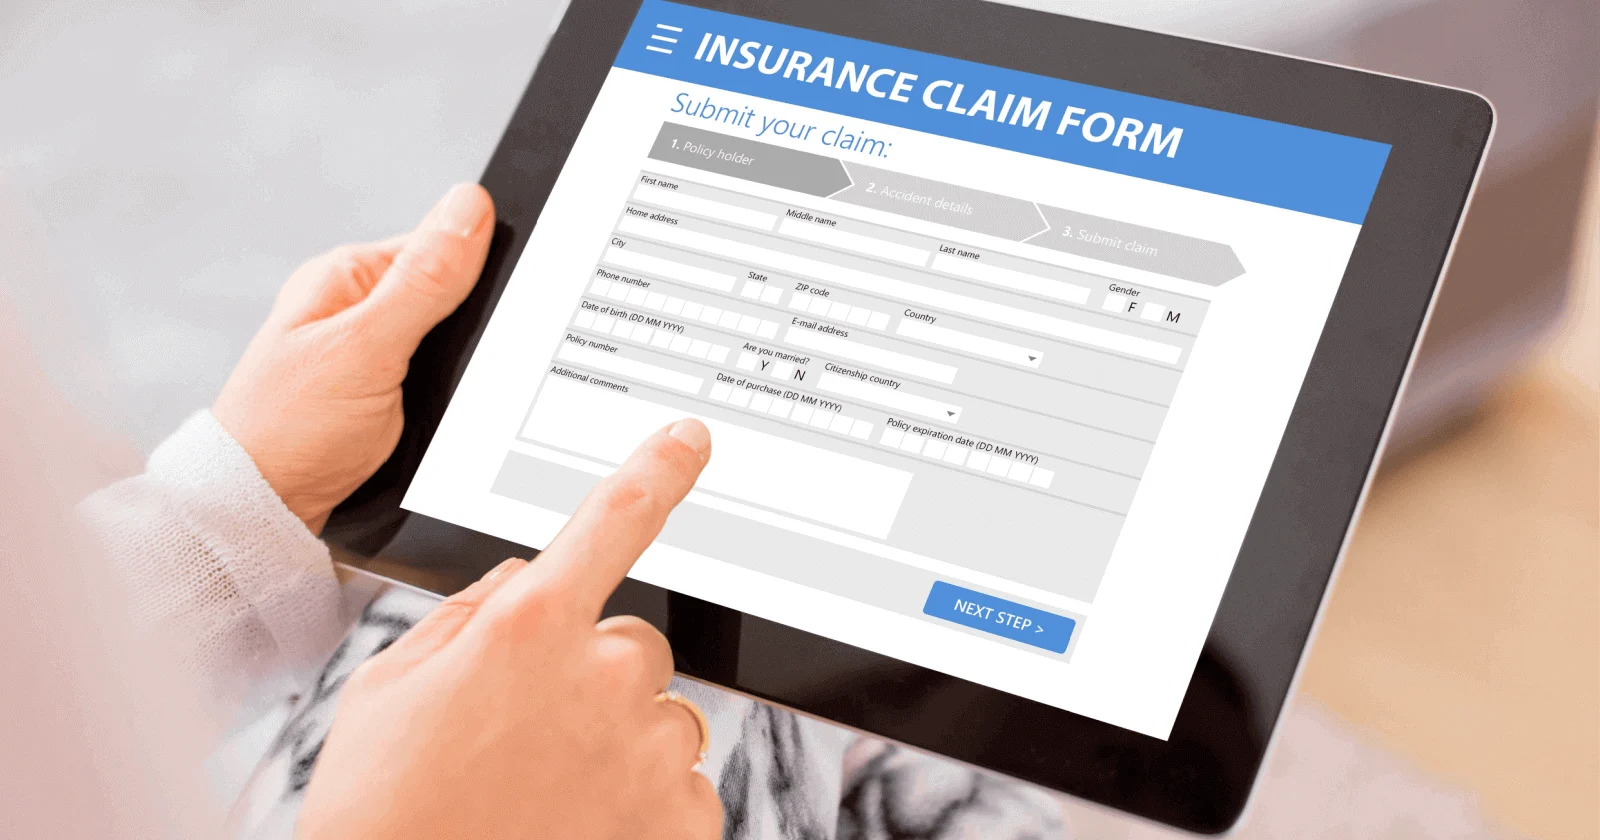 Types of Term Insurance Claims